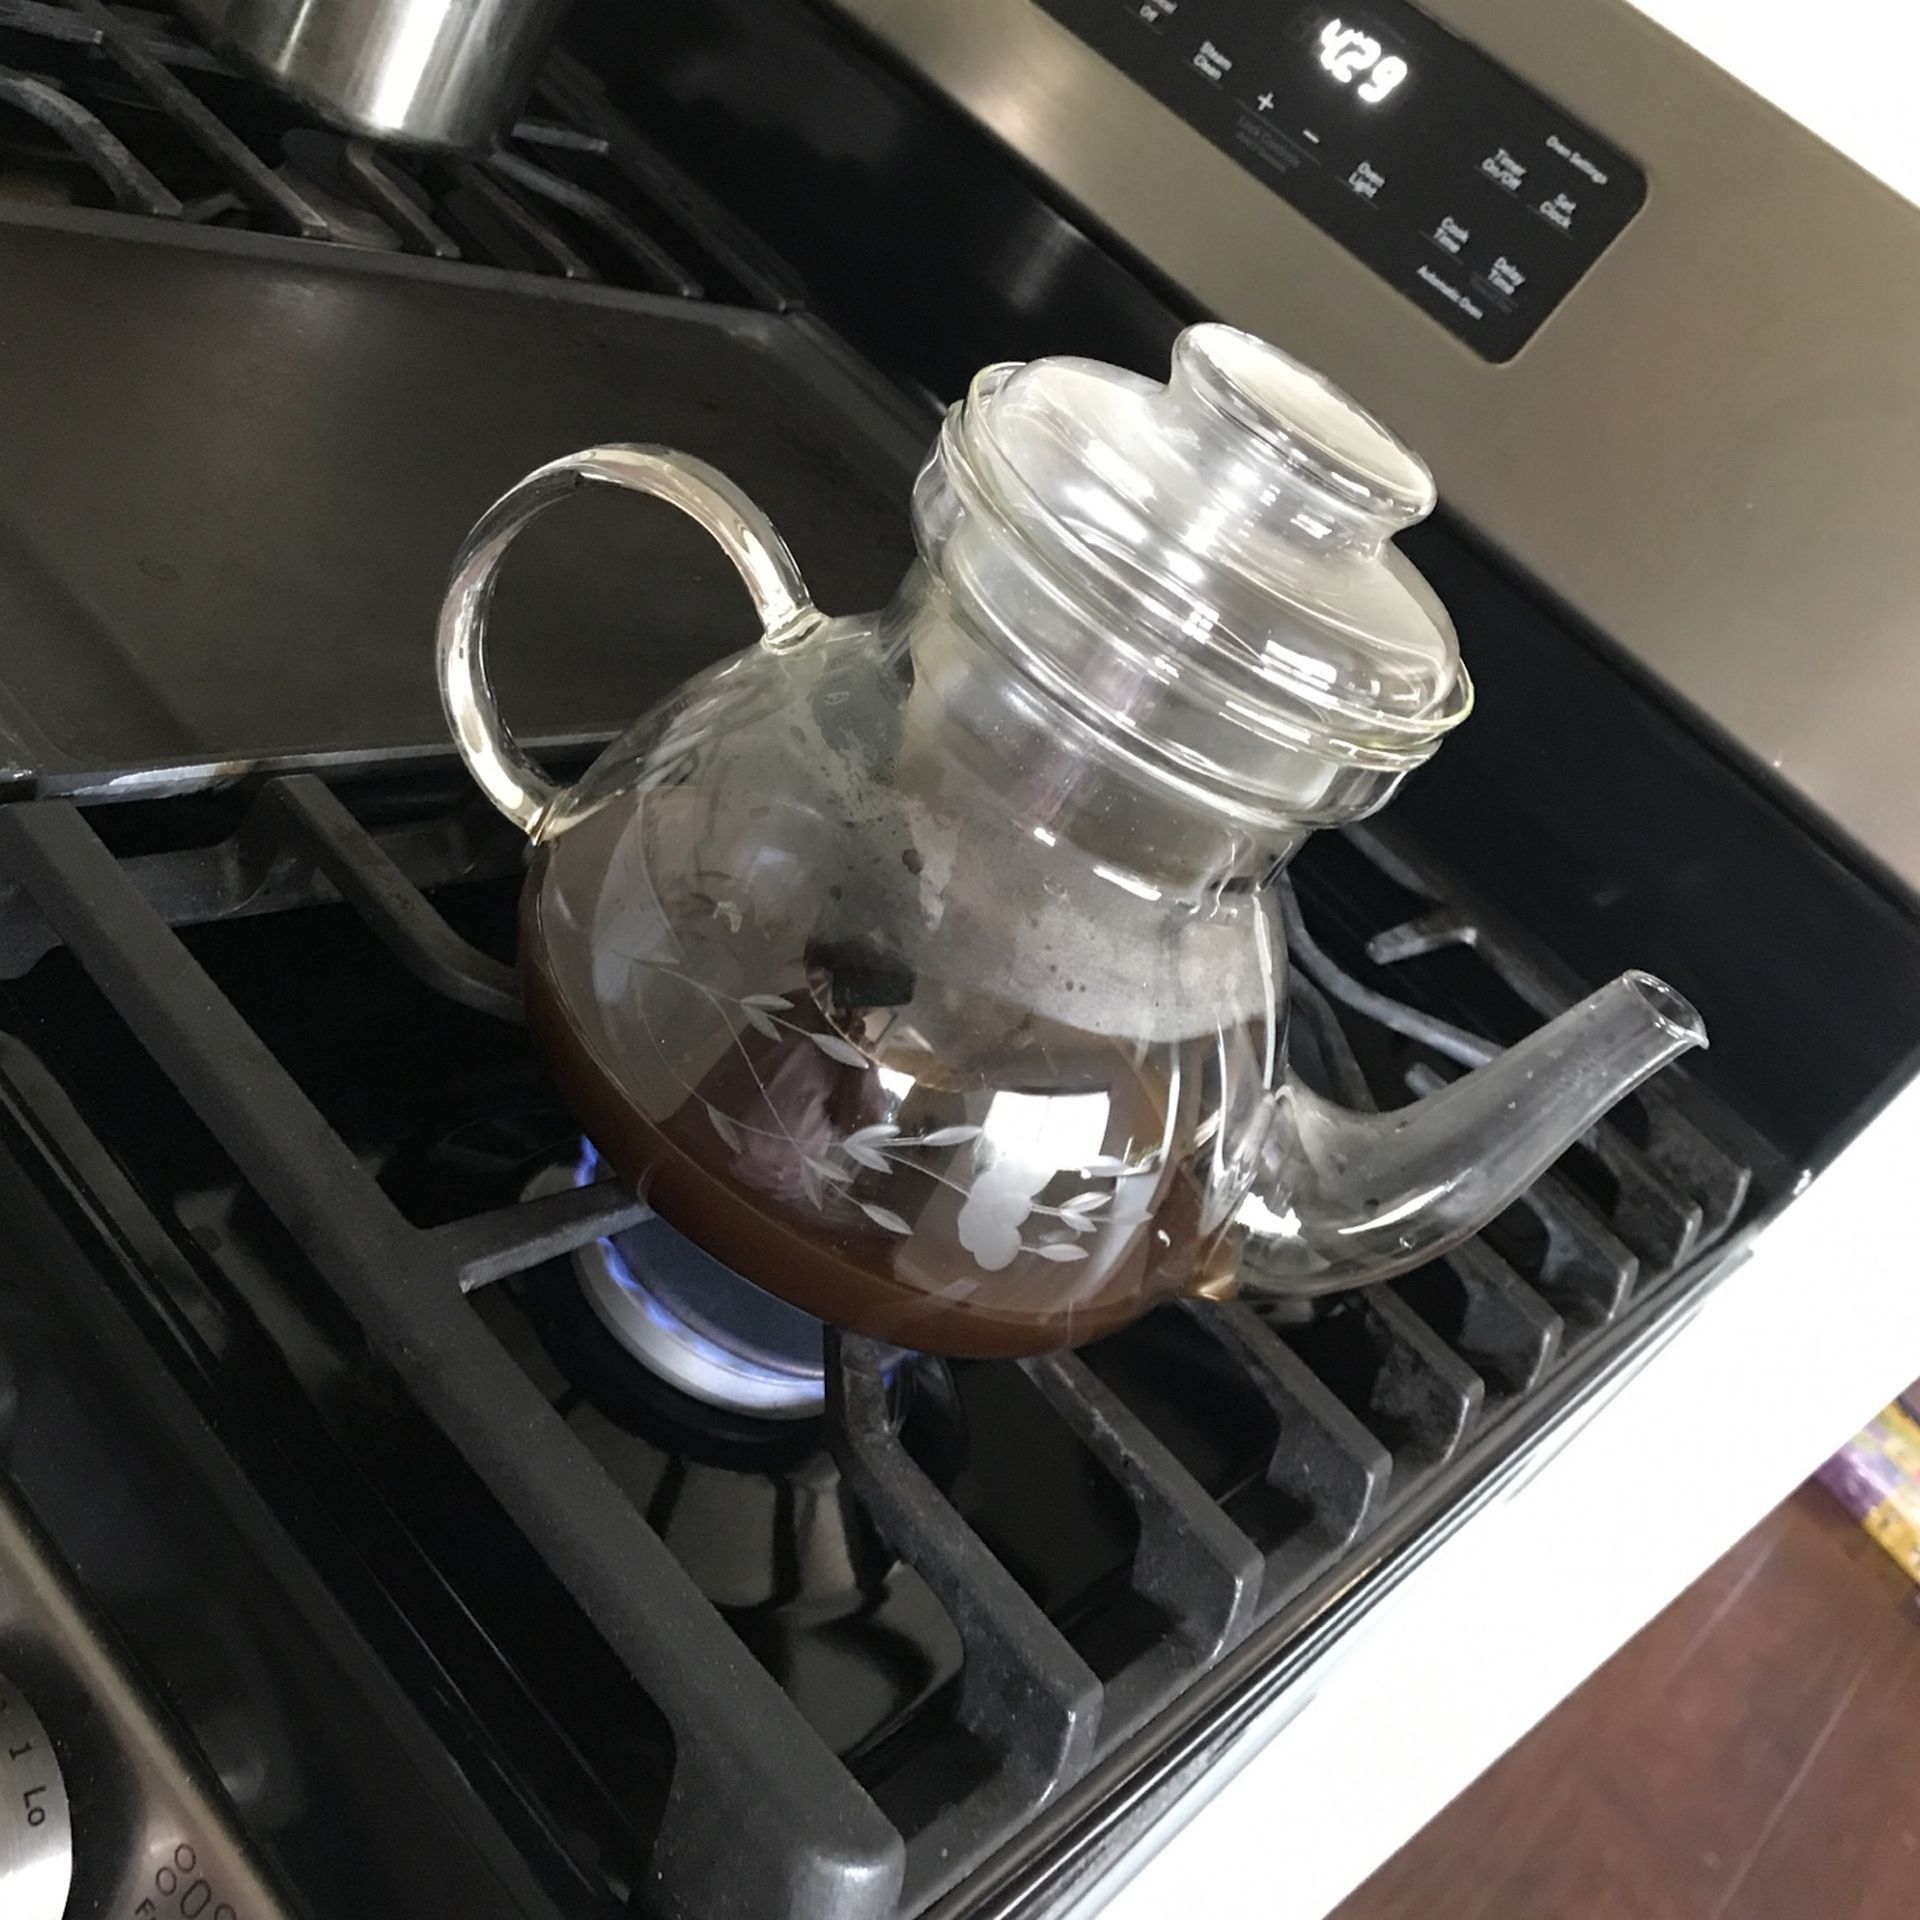 Primula Stewart Whistling Stovetop Tea Kettle for Sale in Chicago, IL -  OfferUp